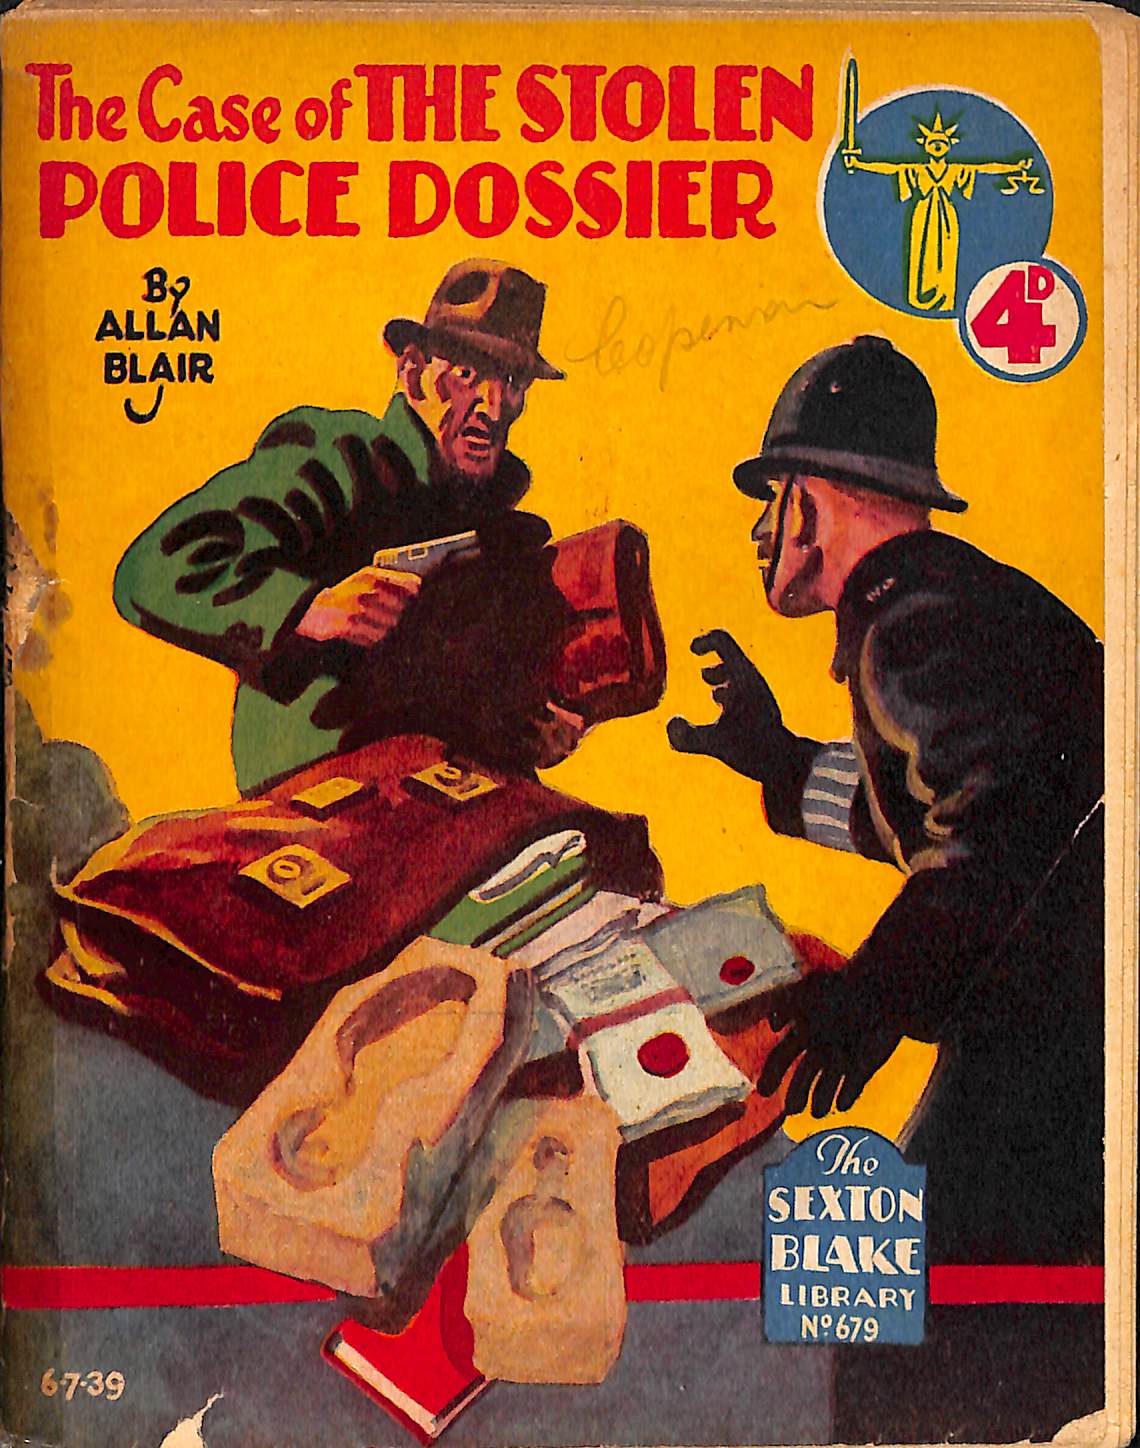 Book Cover For Sexton Blake Library S2 679 - The Case of the Stolen Police Dossier